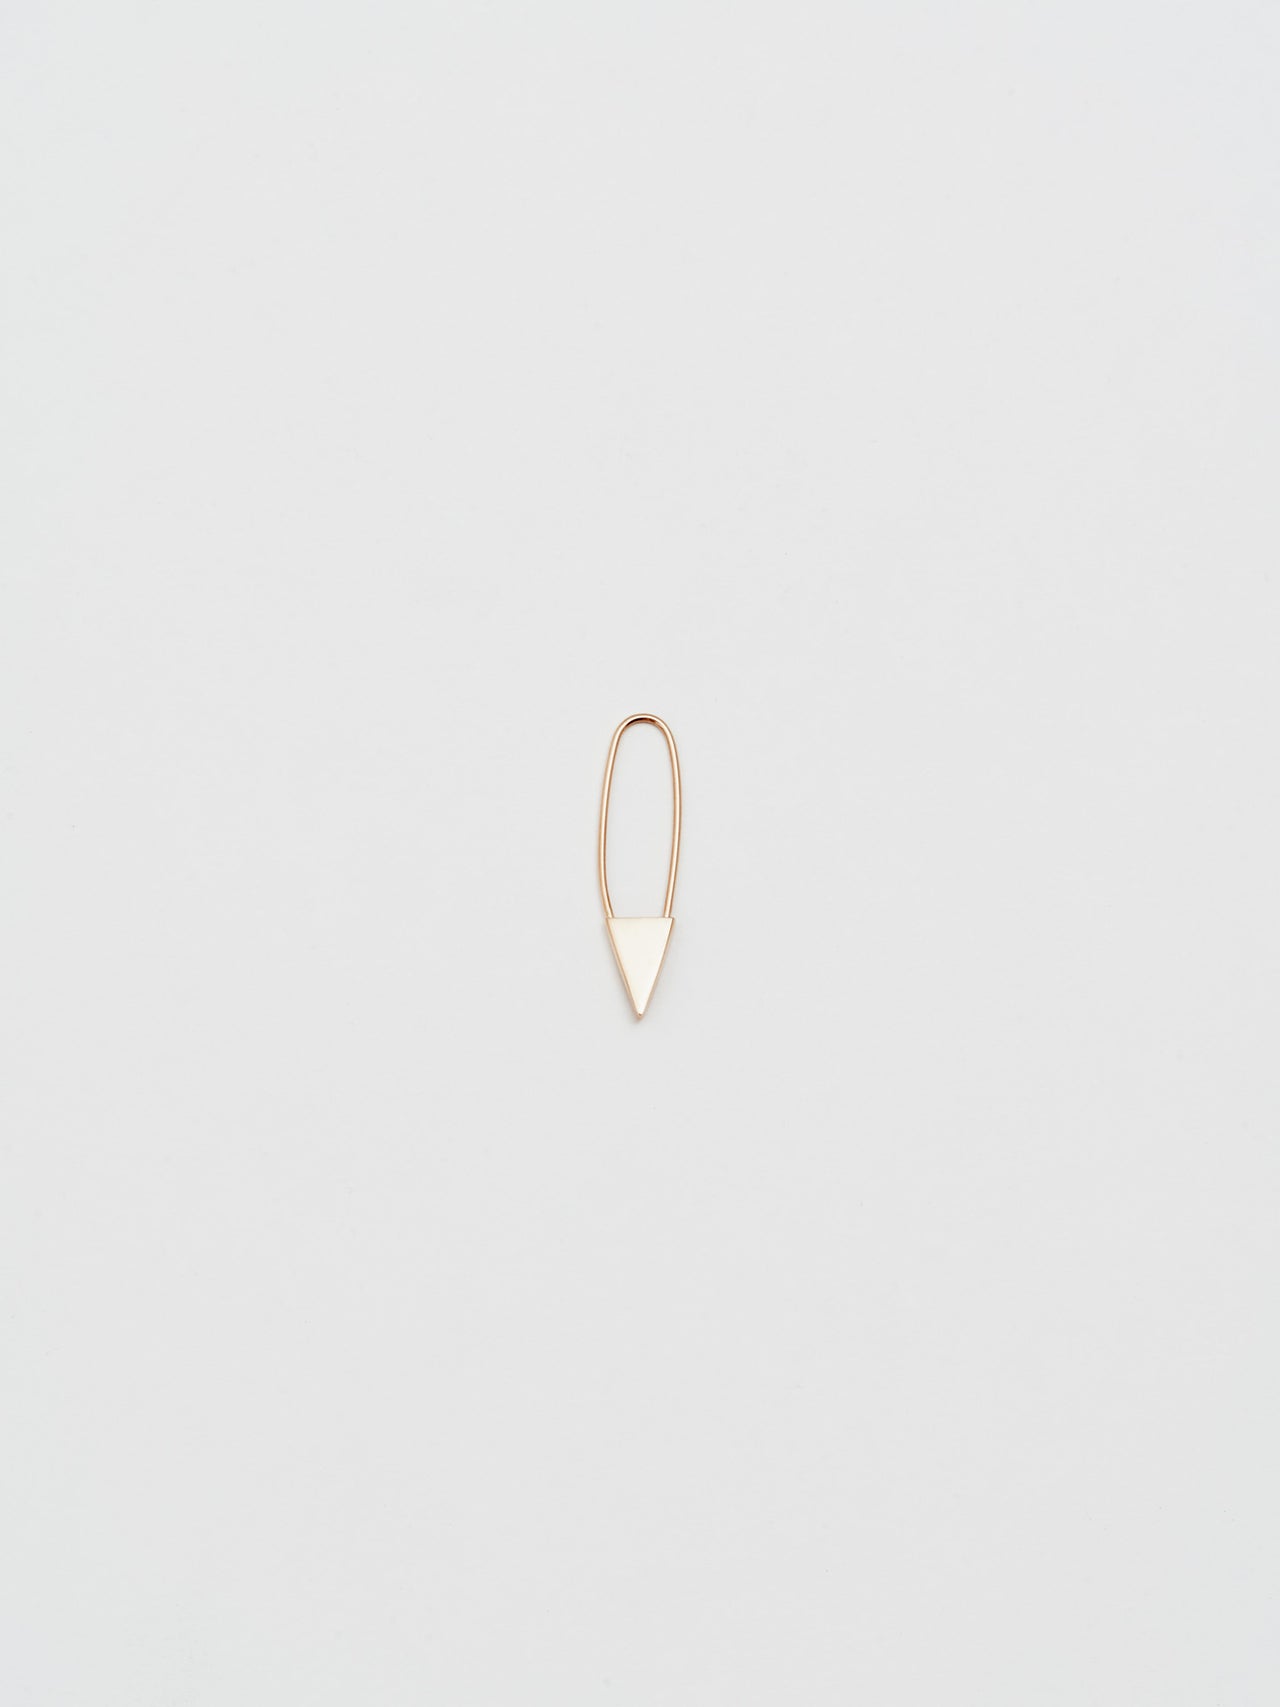 Mini Triangle Safety Pin Earring in Rose Gold, light grey background.